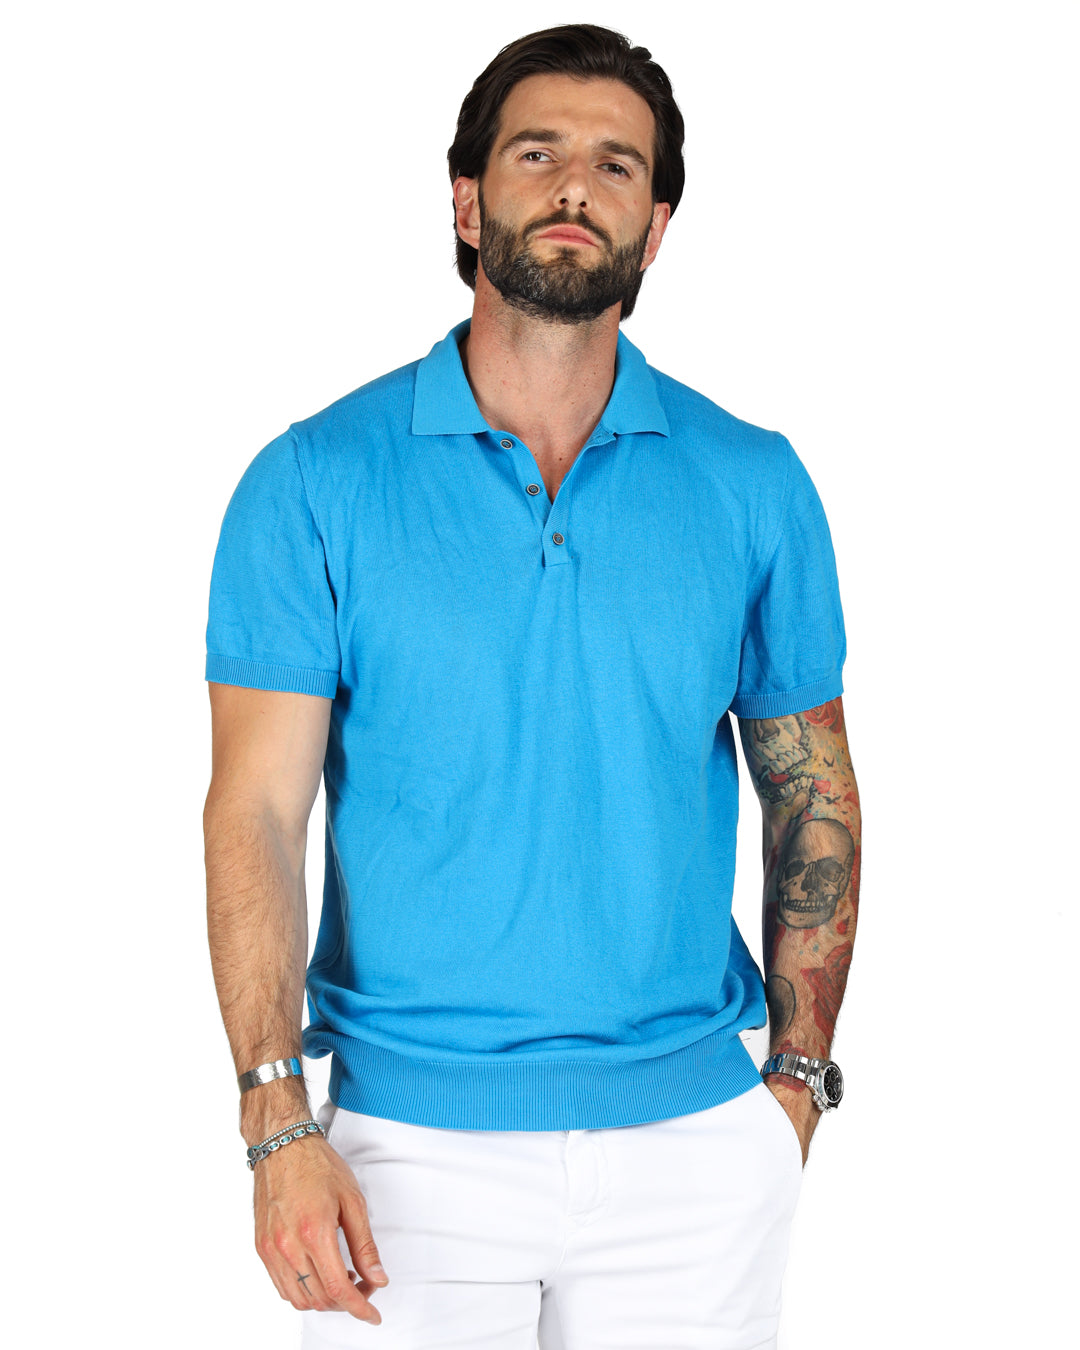 ROGER - MEDITERRANEAN KNITTED POLO SHIRT